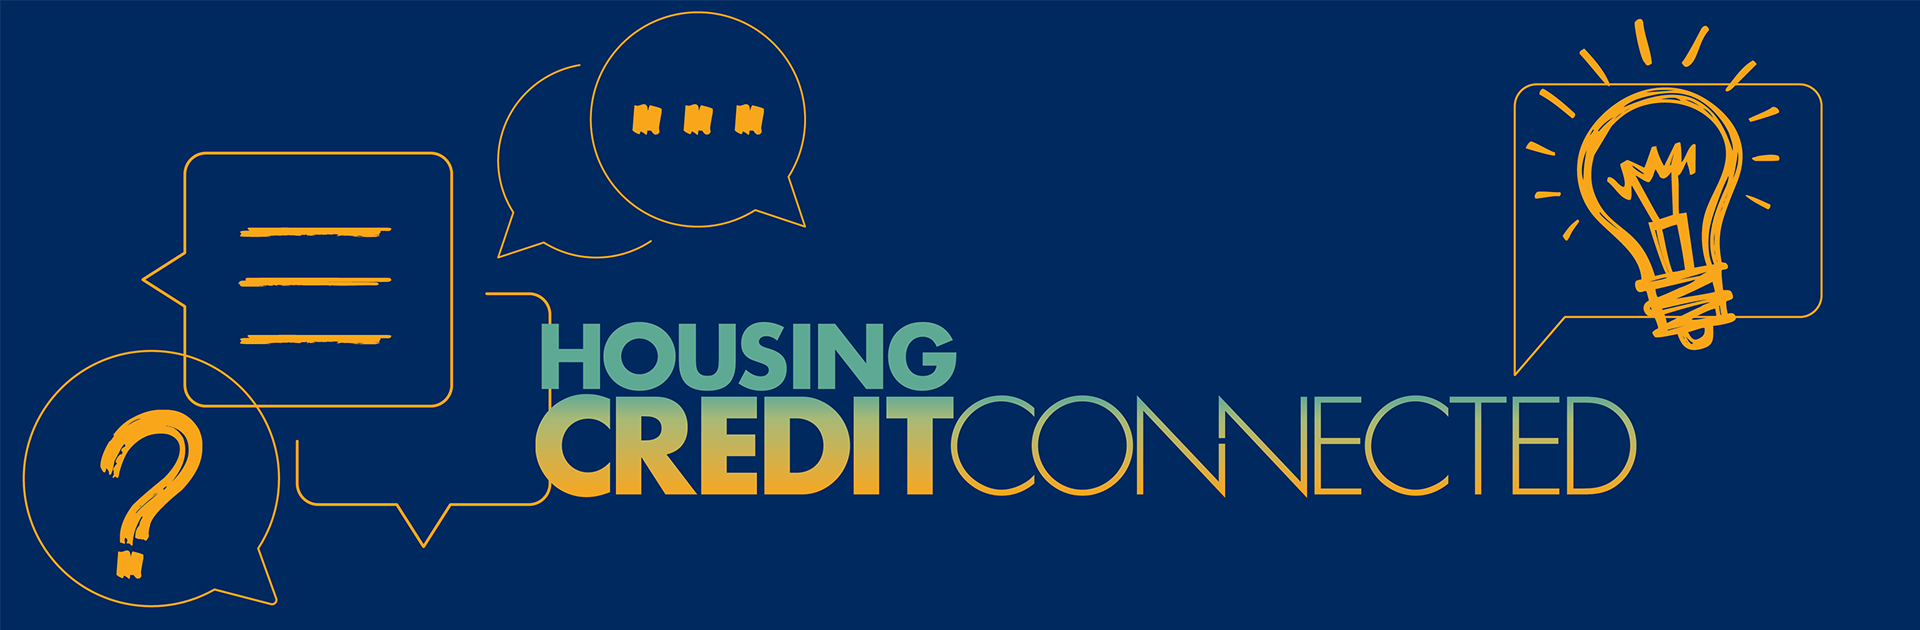 NCSHA Housing Credit Connected Web Banner